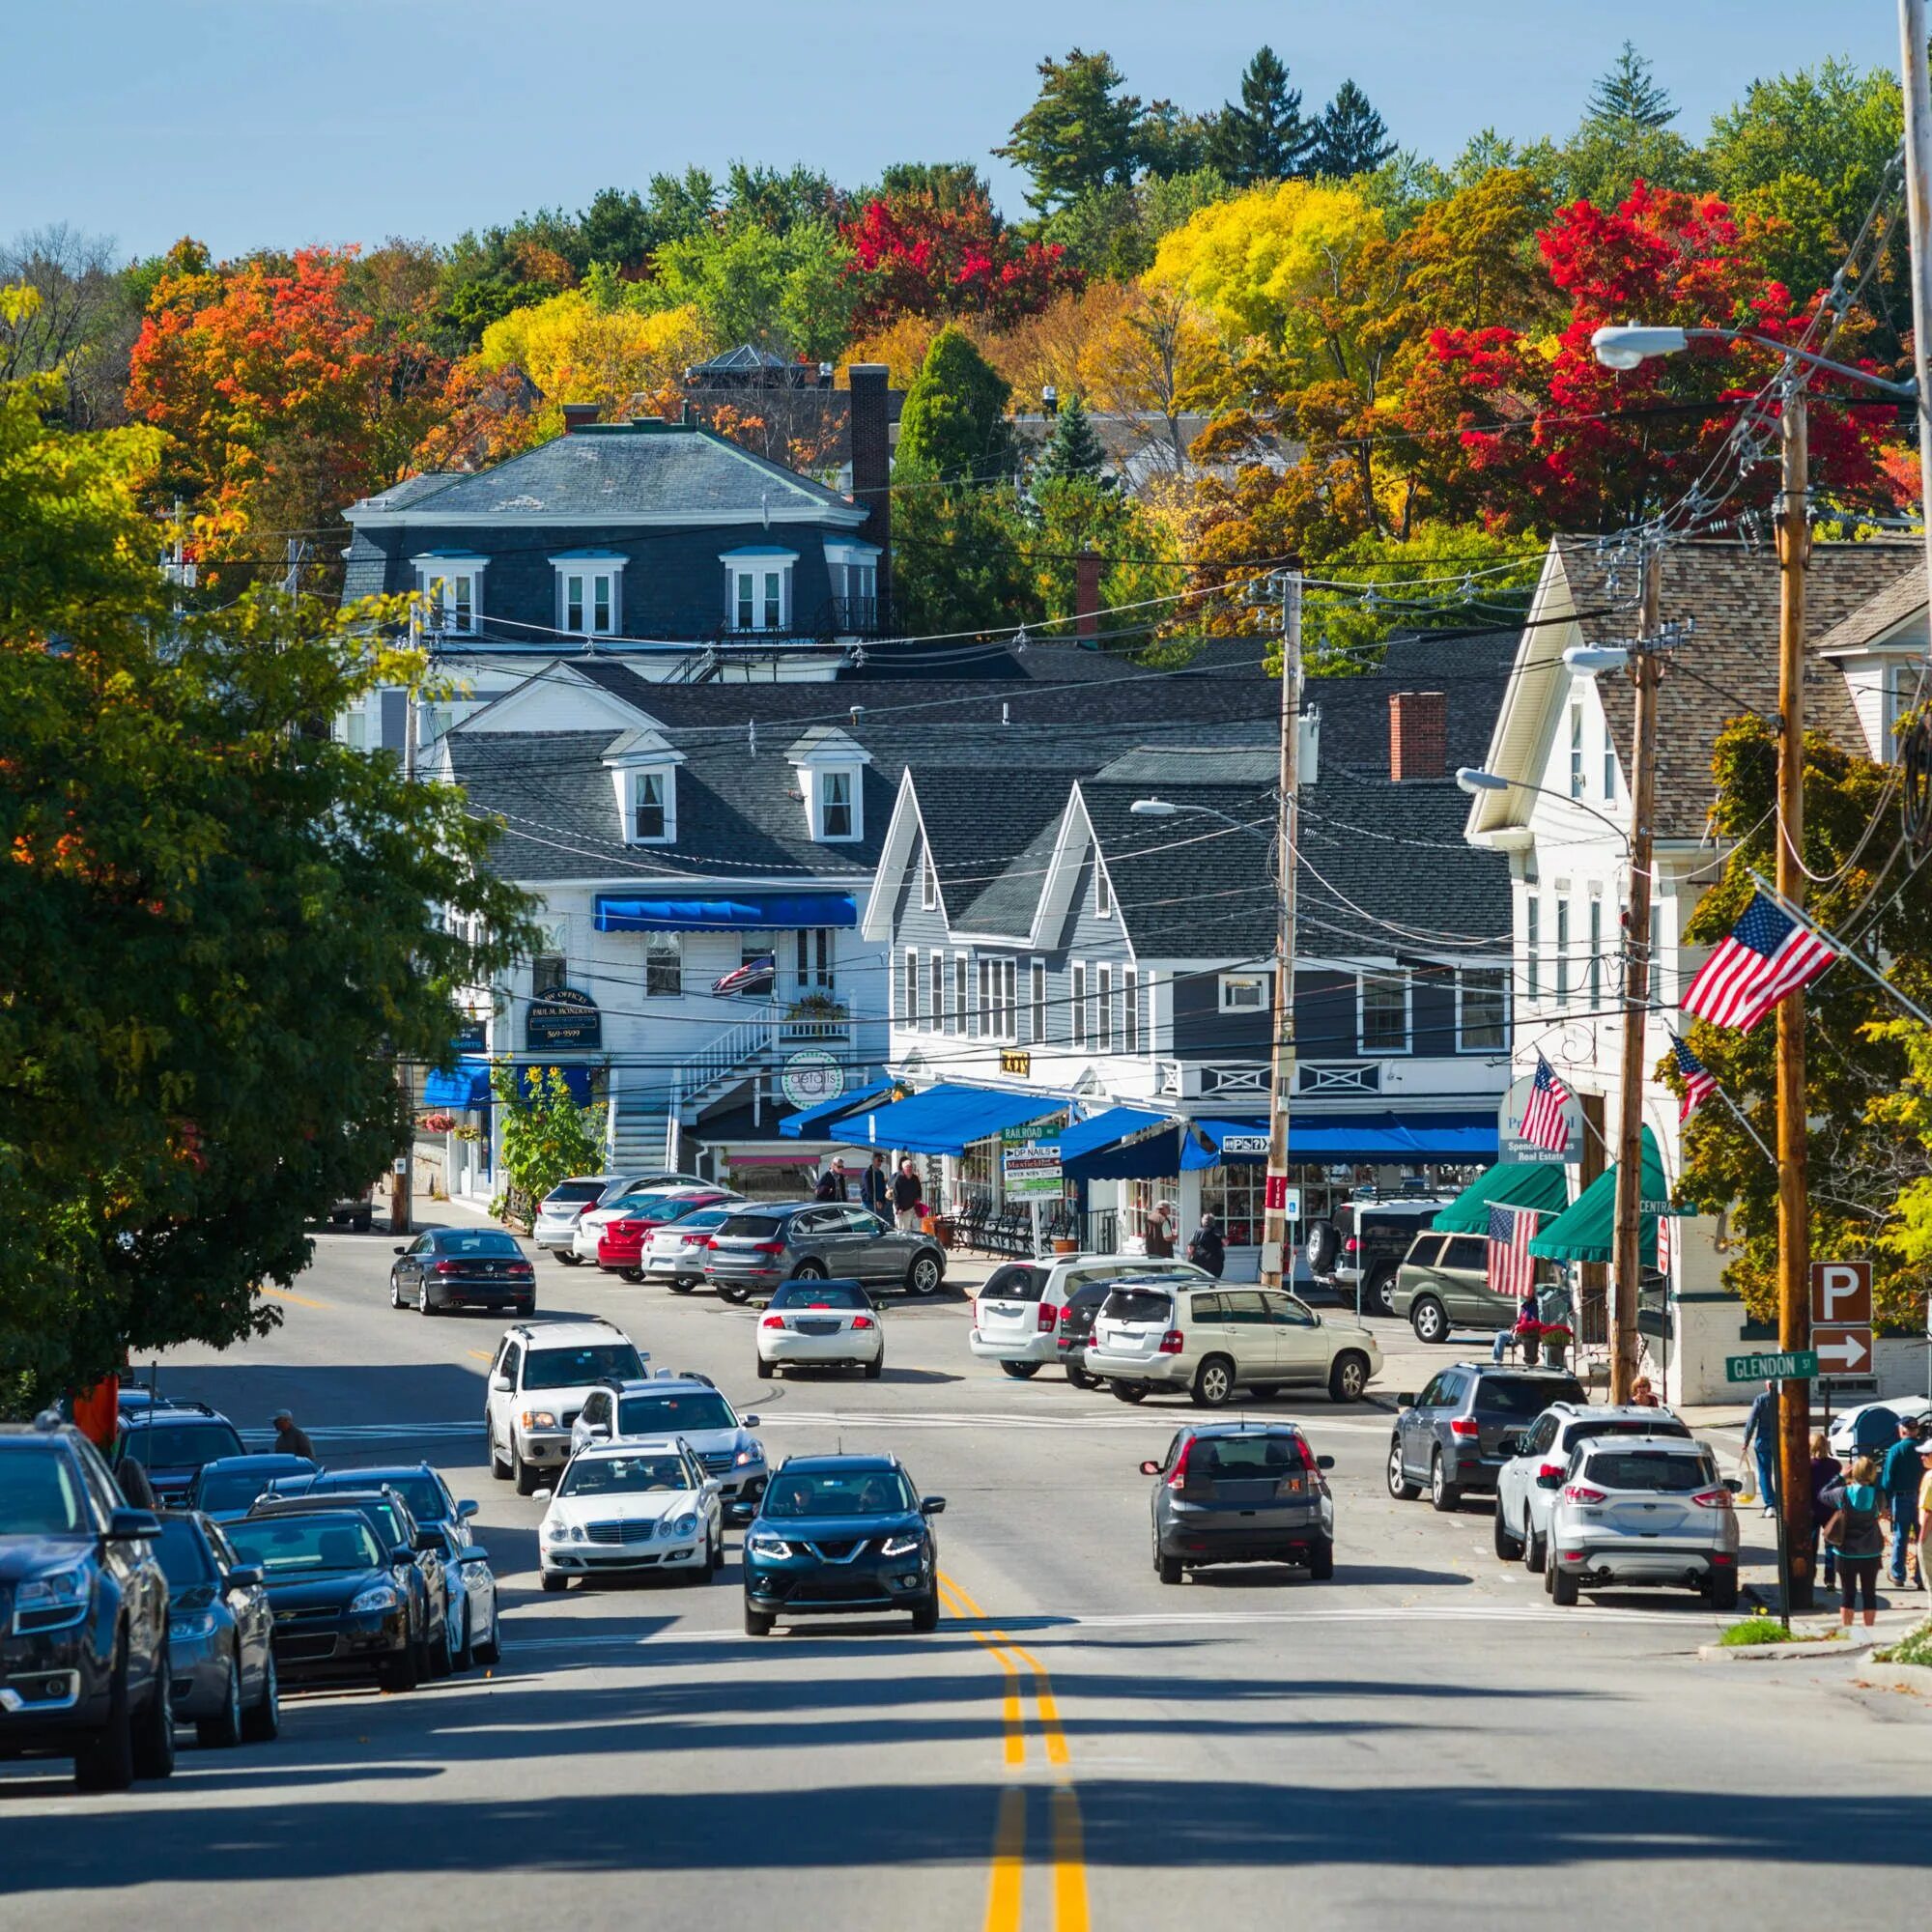 Towns in usa. Нью Хемпшер. Штат Нью-Хэмпшир США. New Hampshire штат. Нью-Бостон, Нью-Гэмпшир.